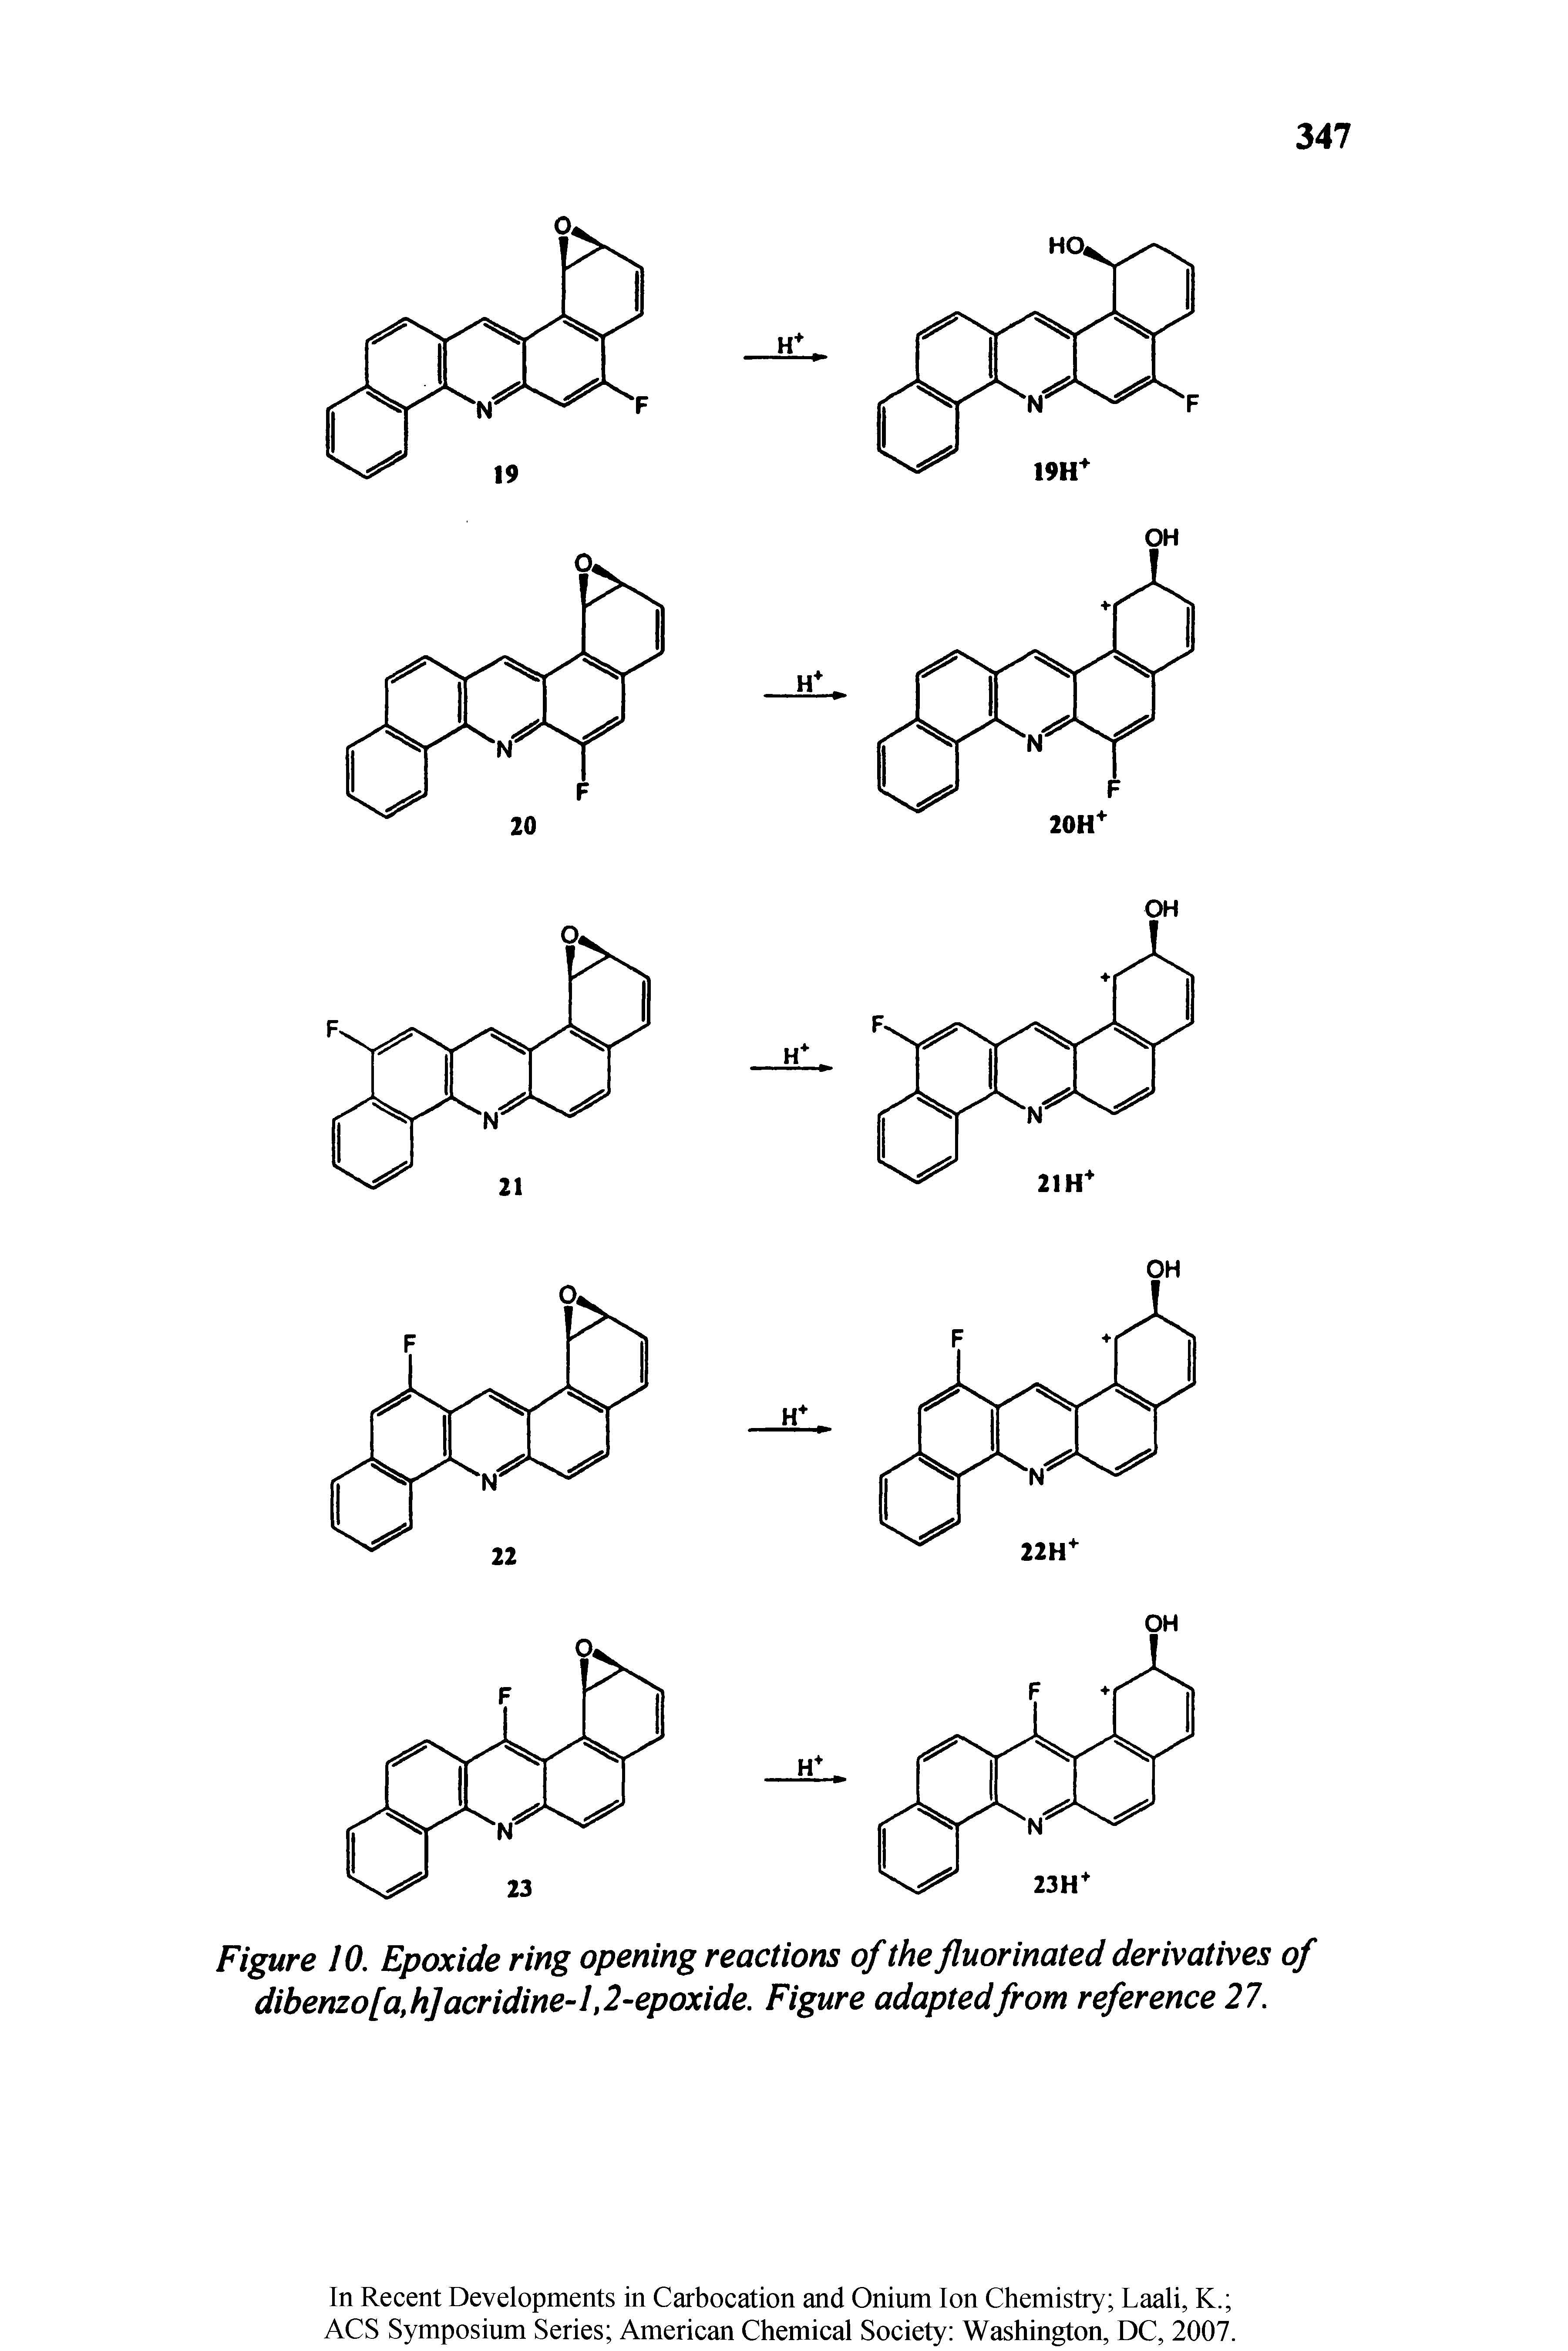 Figure 10. Epoxide ring opening reactions of the fluor mated derivatives of dibenzo [a,h] acridine-1,2-epoxide. Figure adapted from reference 27.